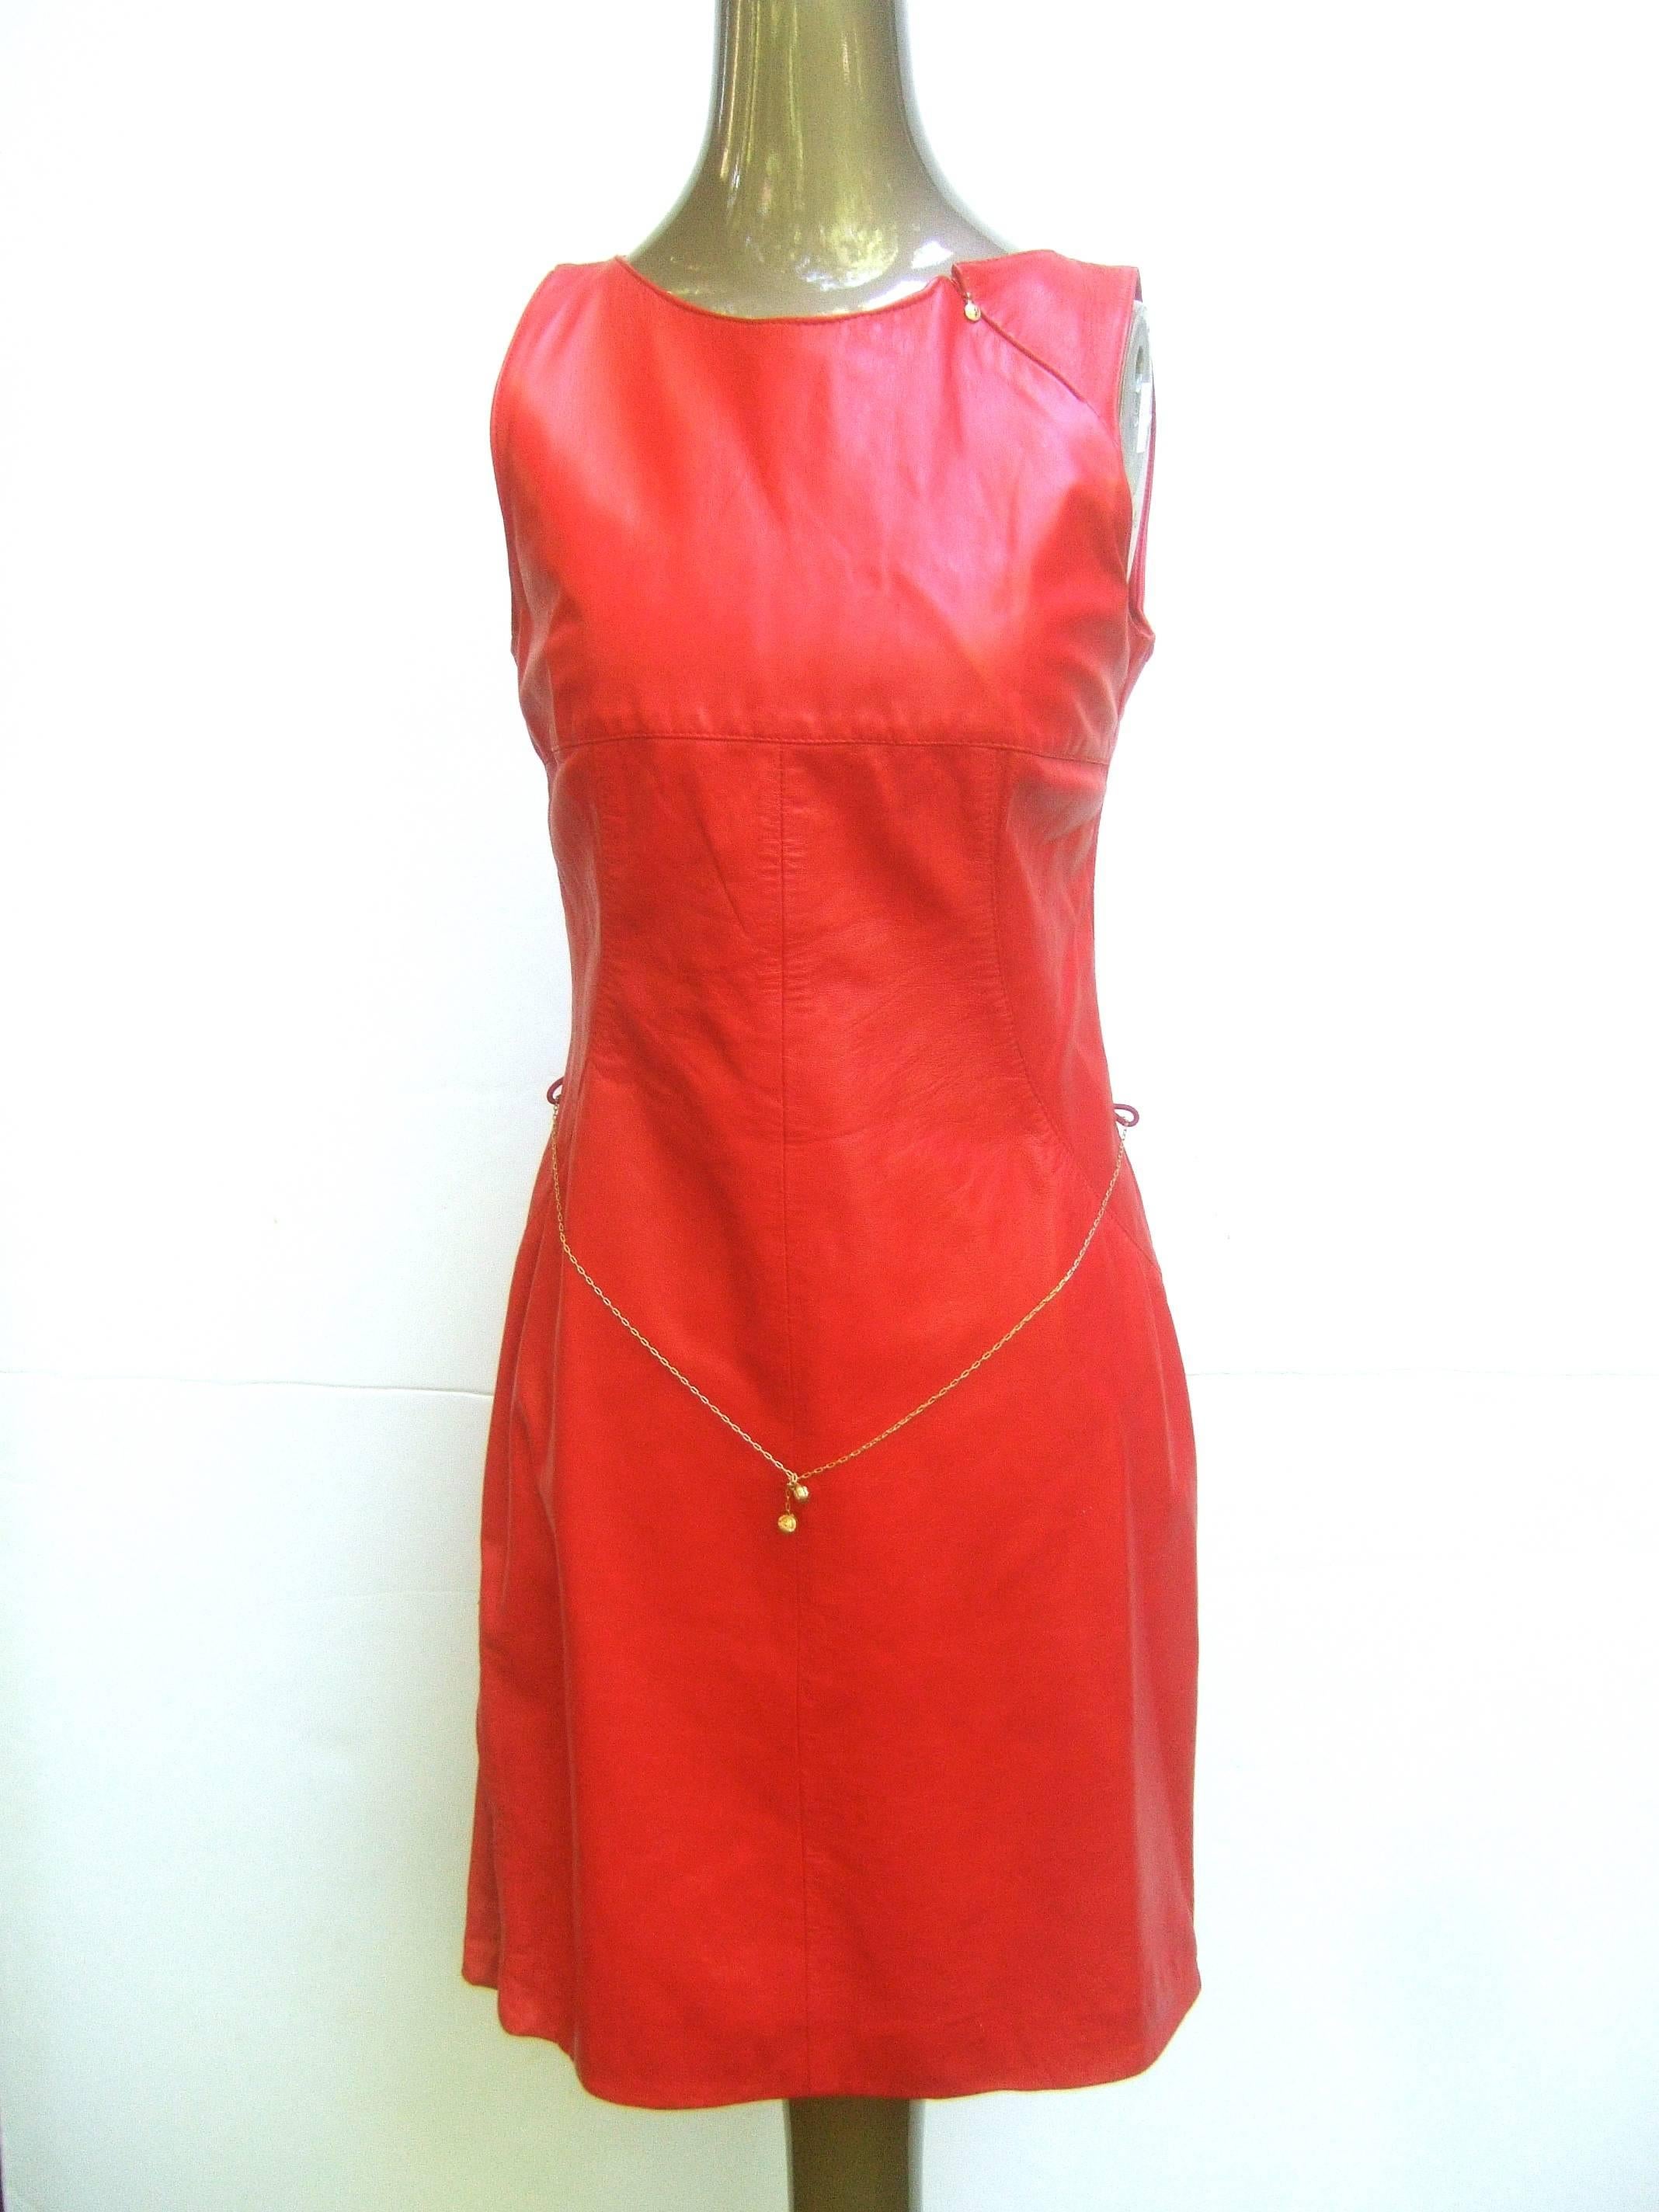 Exciting cherry red leather body hugging sleeveless dress. High impact.
Delicate gilt chain belt adorned with subtle Medusa heads. Flirty zippers
at the hem and shoulder also sporting gilt mini Medusas. Very good vintage condition.  Labelled Versace